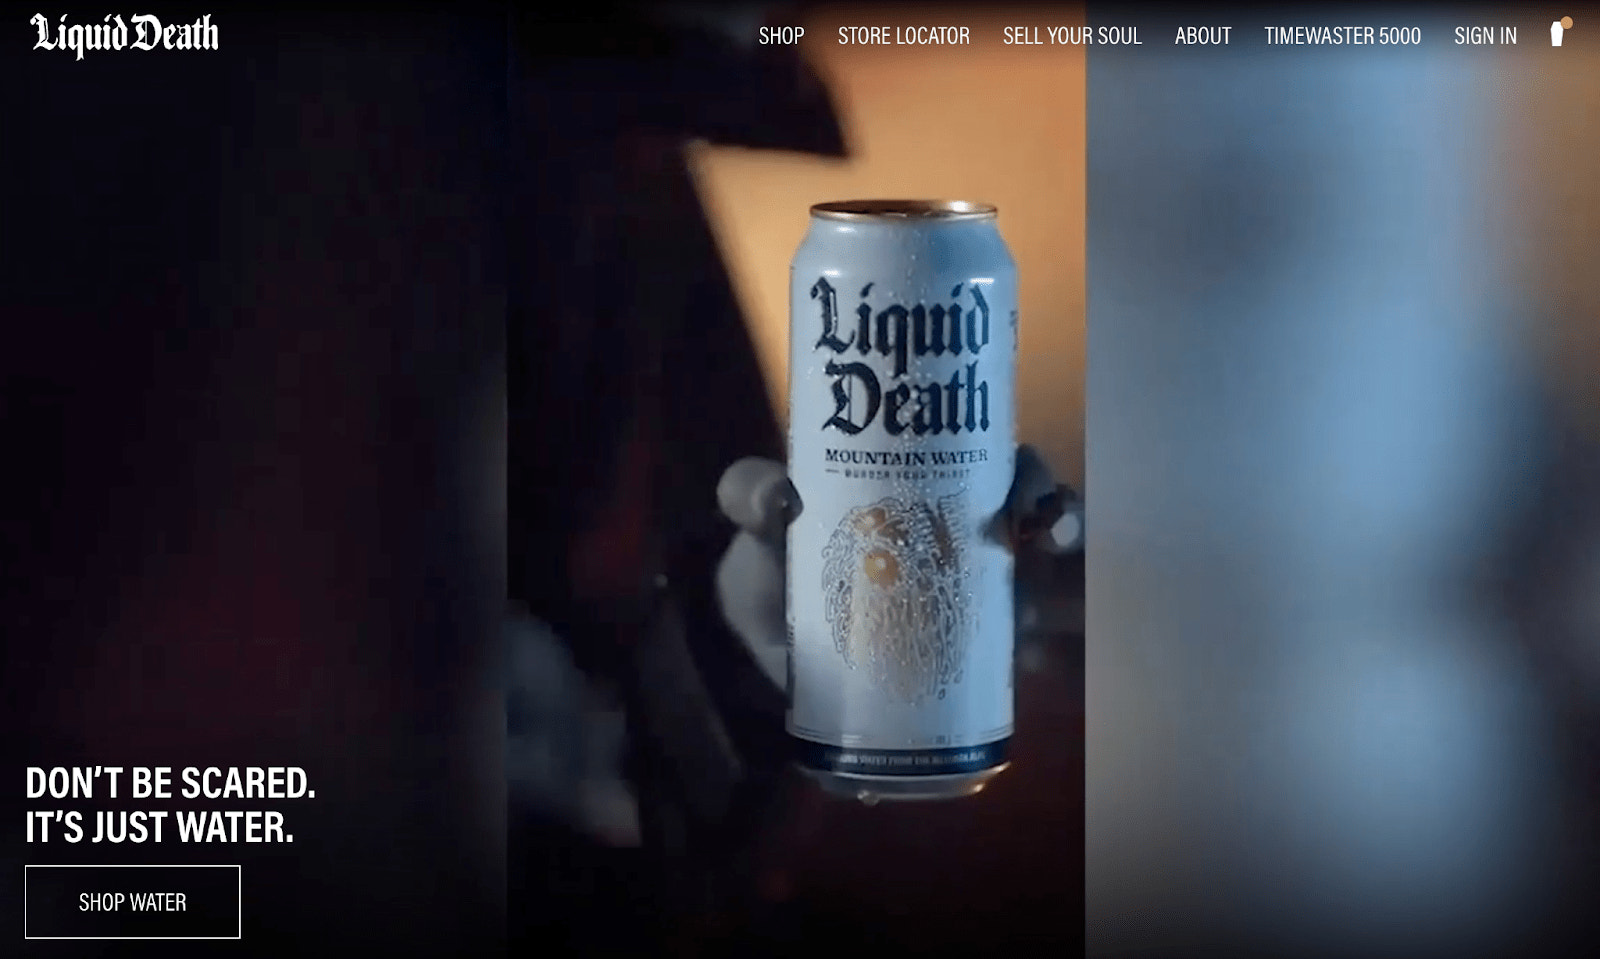 Screenshot of the Liquid Death website showing off their water in a punk rock aluminum can.